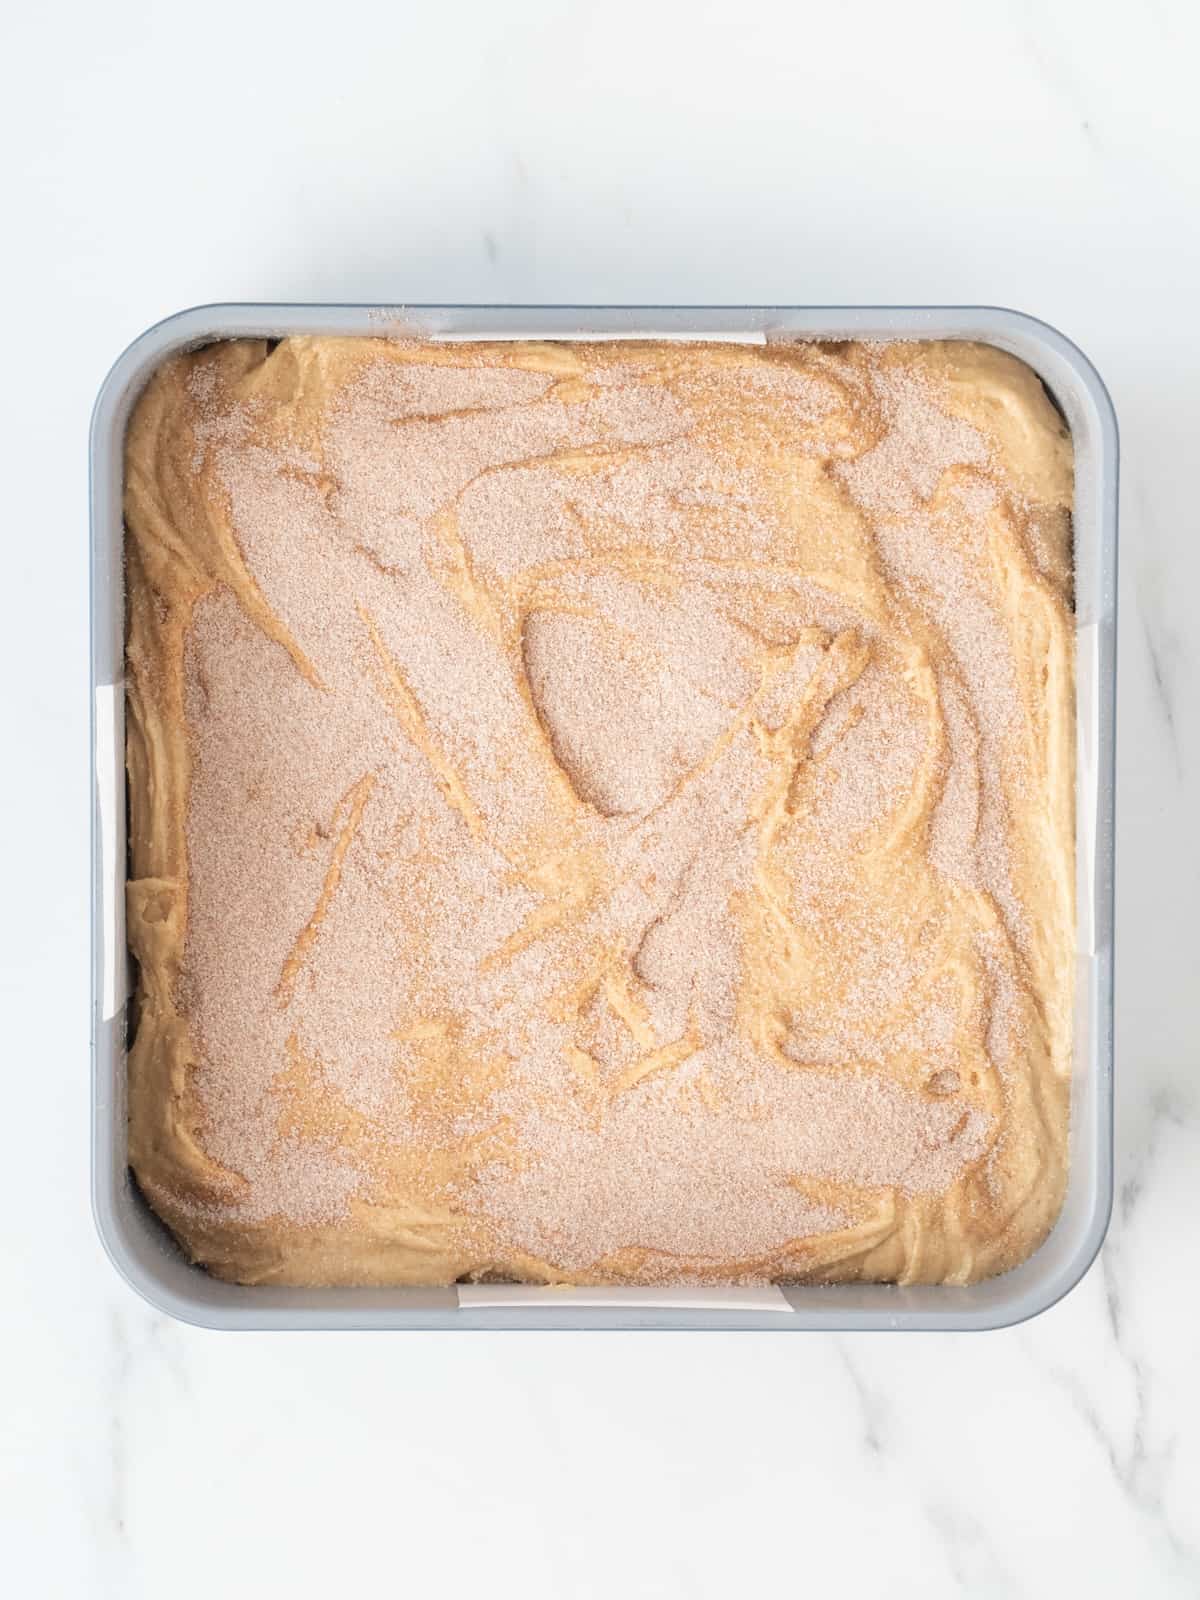 A 9x9 inch baking pan filled with snickerdoodle blondie brownie batter, sprinkled with cinnamon sugar.